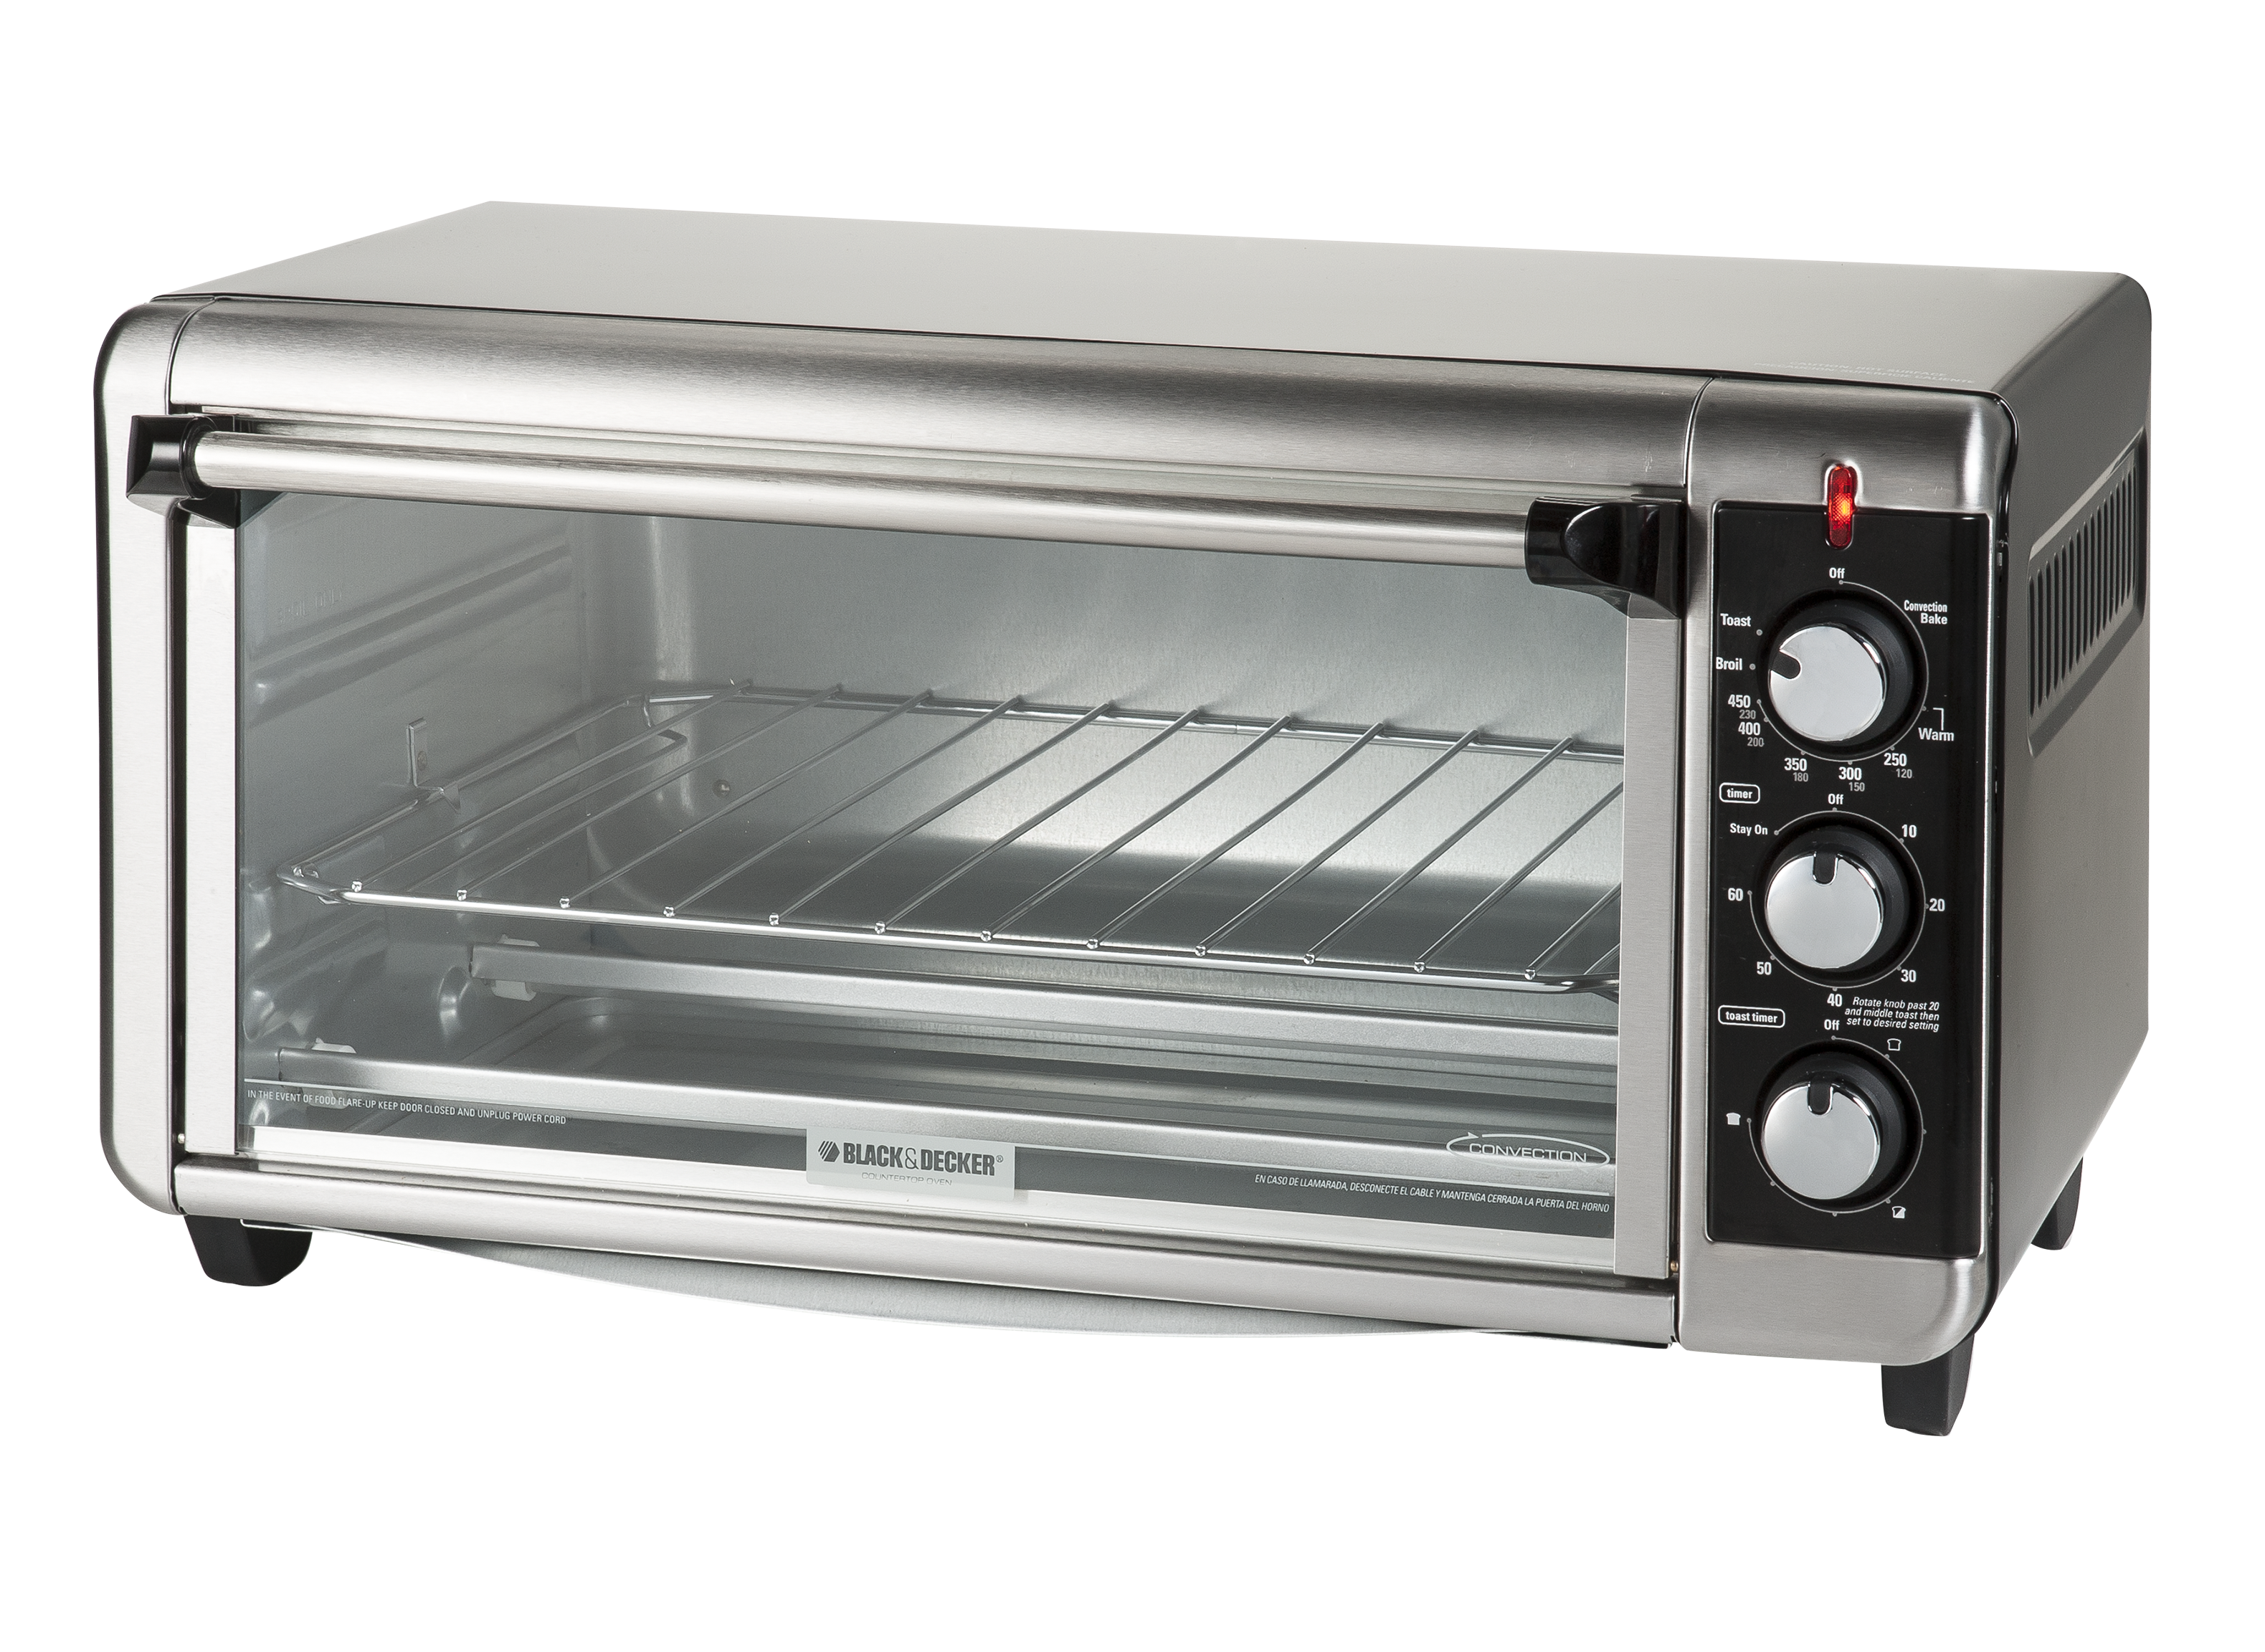 https://crdms.images.consumerreports.org/prod/products/cr/models/285120-toasterovens-blackdecker-to3250xsb.png